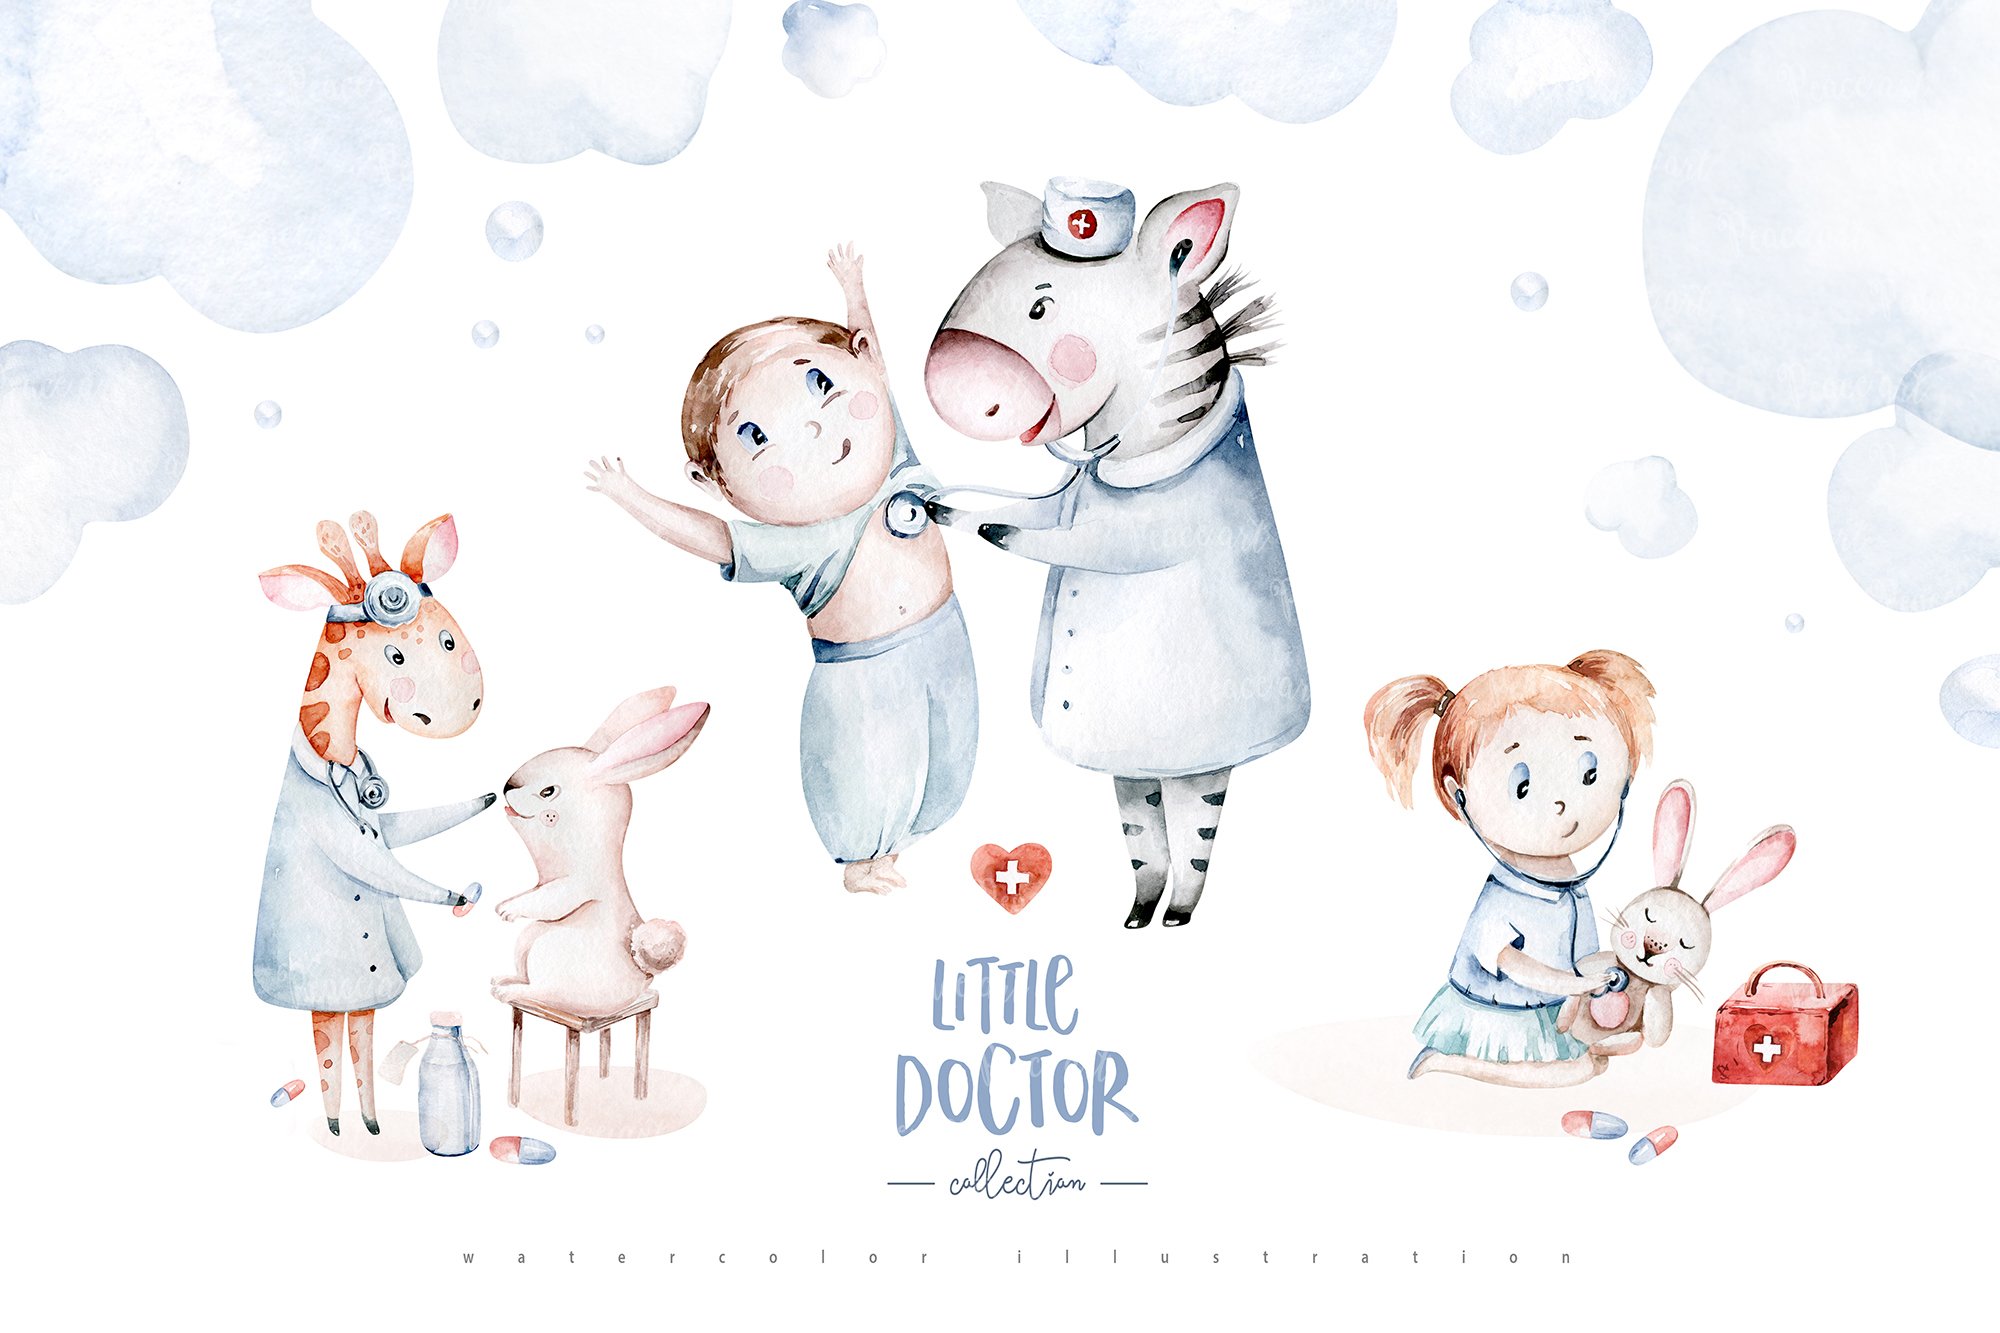 Little doctor cute collection cover image.